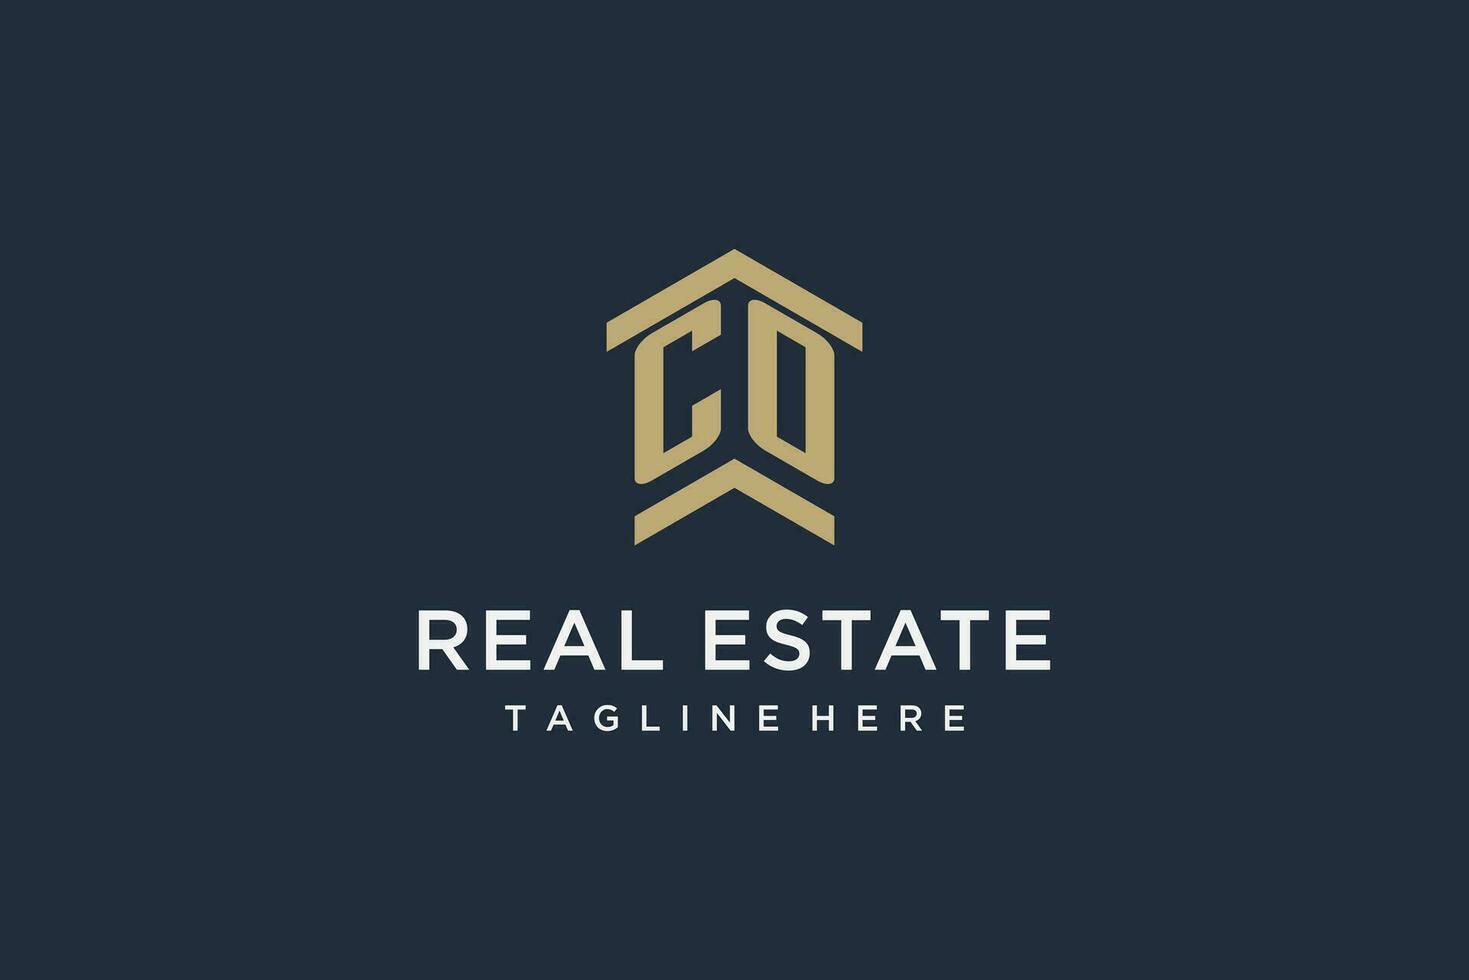 Initial CO logo for real estate with simple and creative house roof icon logo design ideas vector